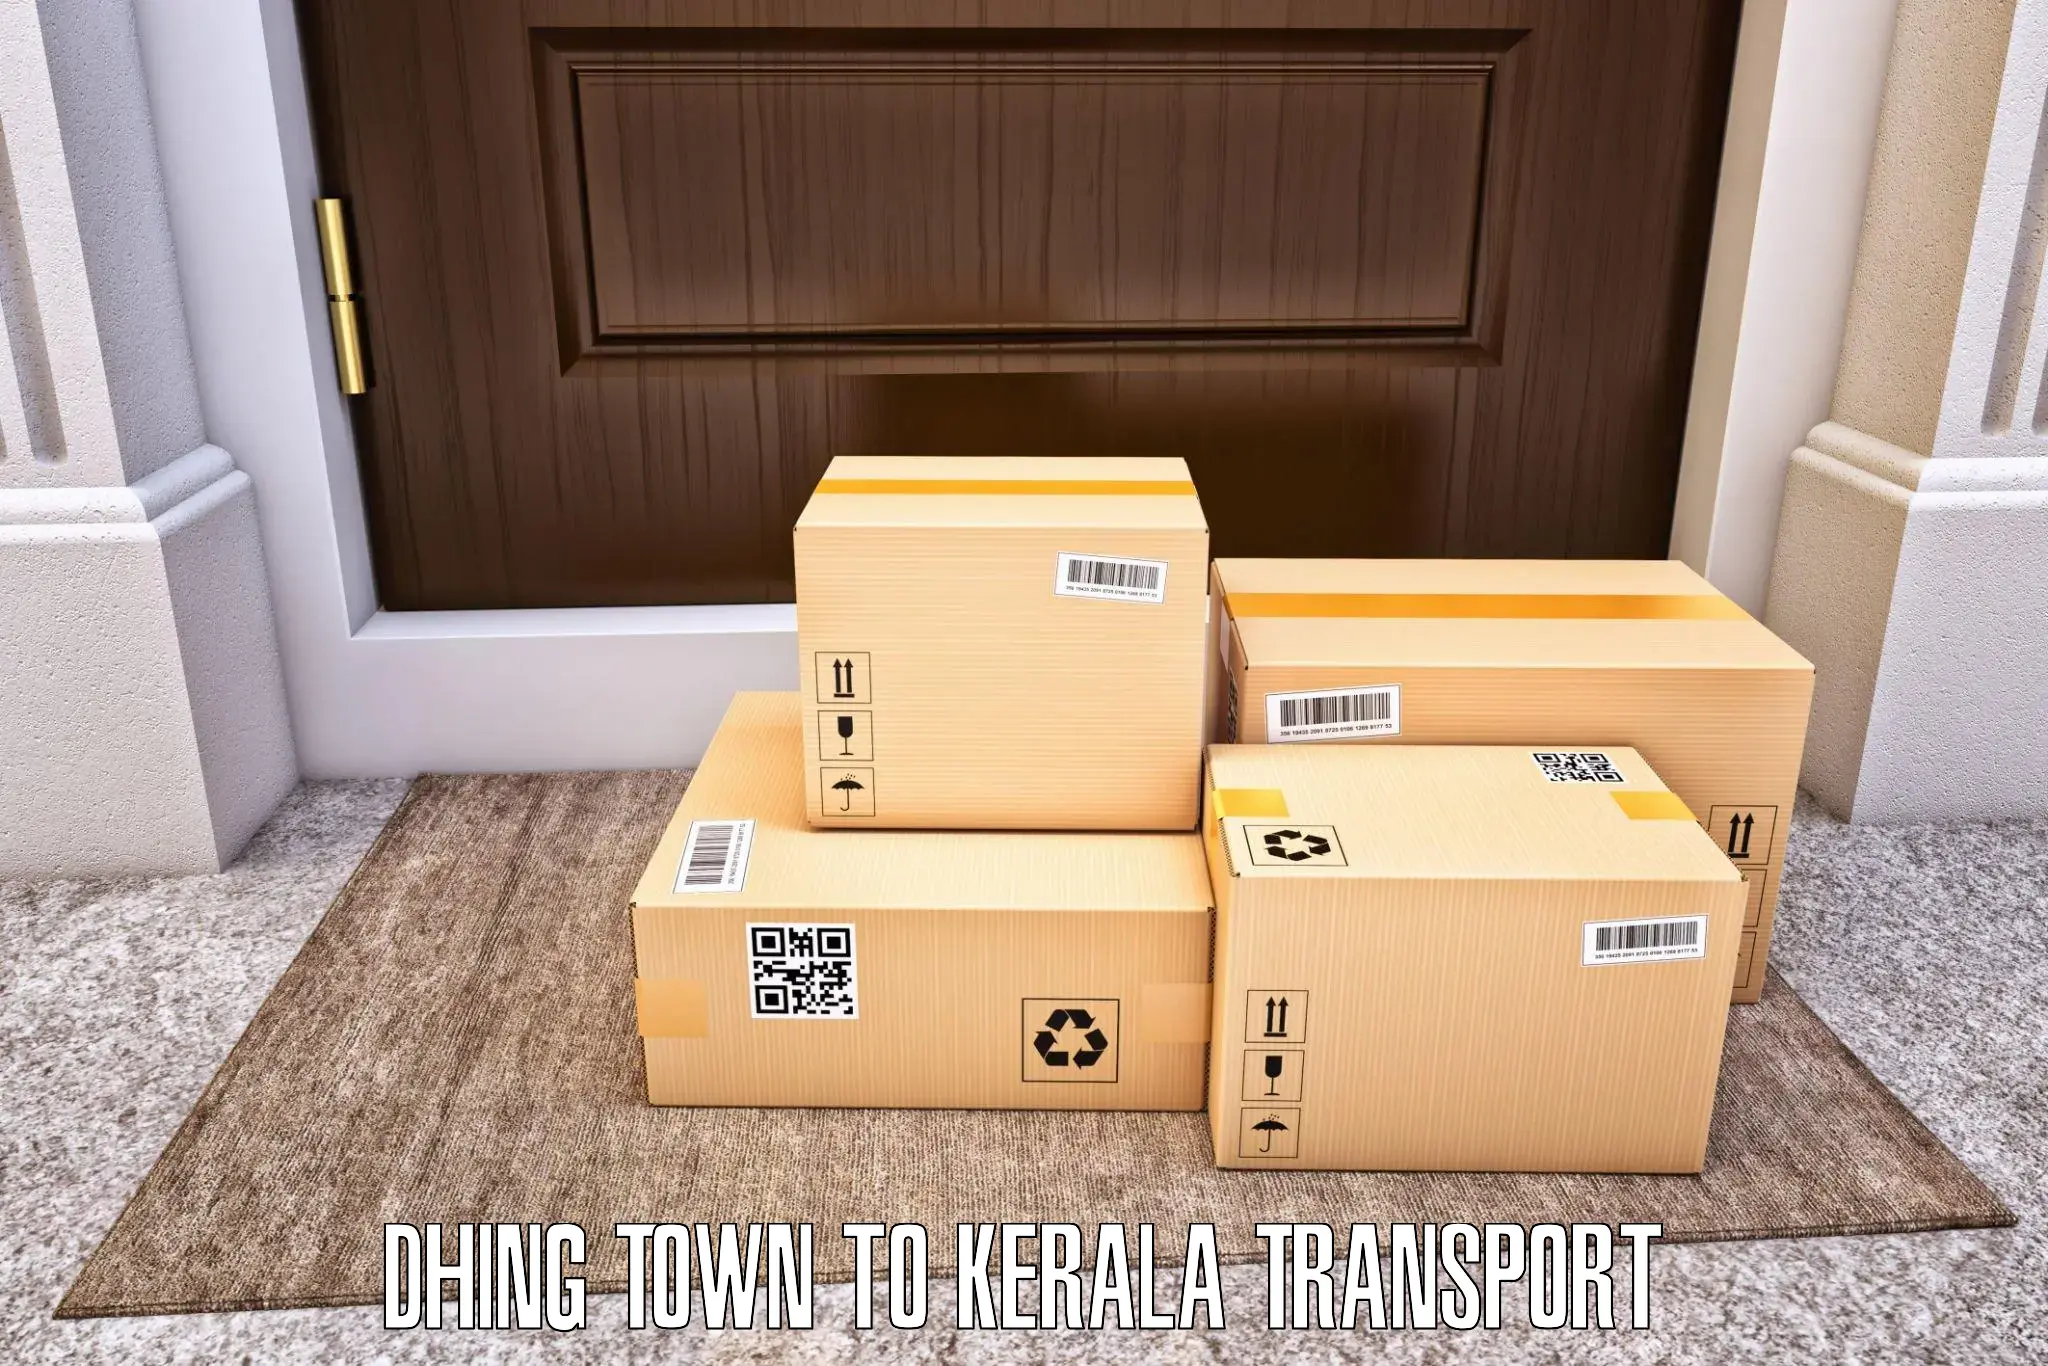 Part load transport service in India Dhing Town to Kadanad